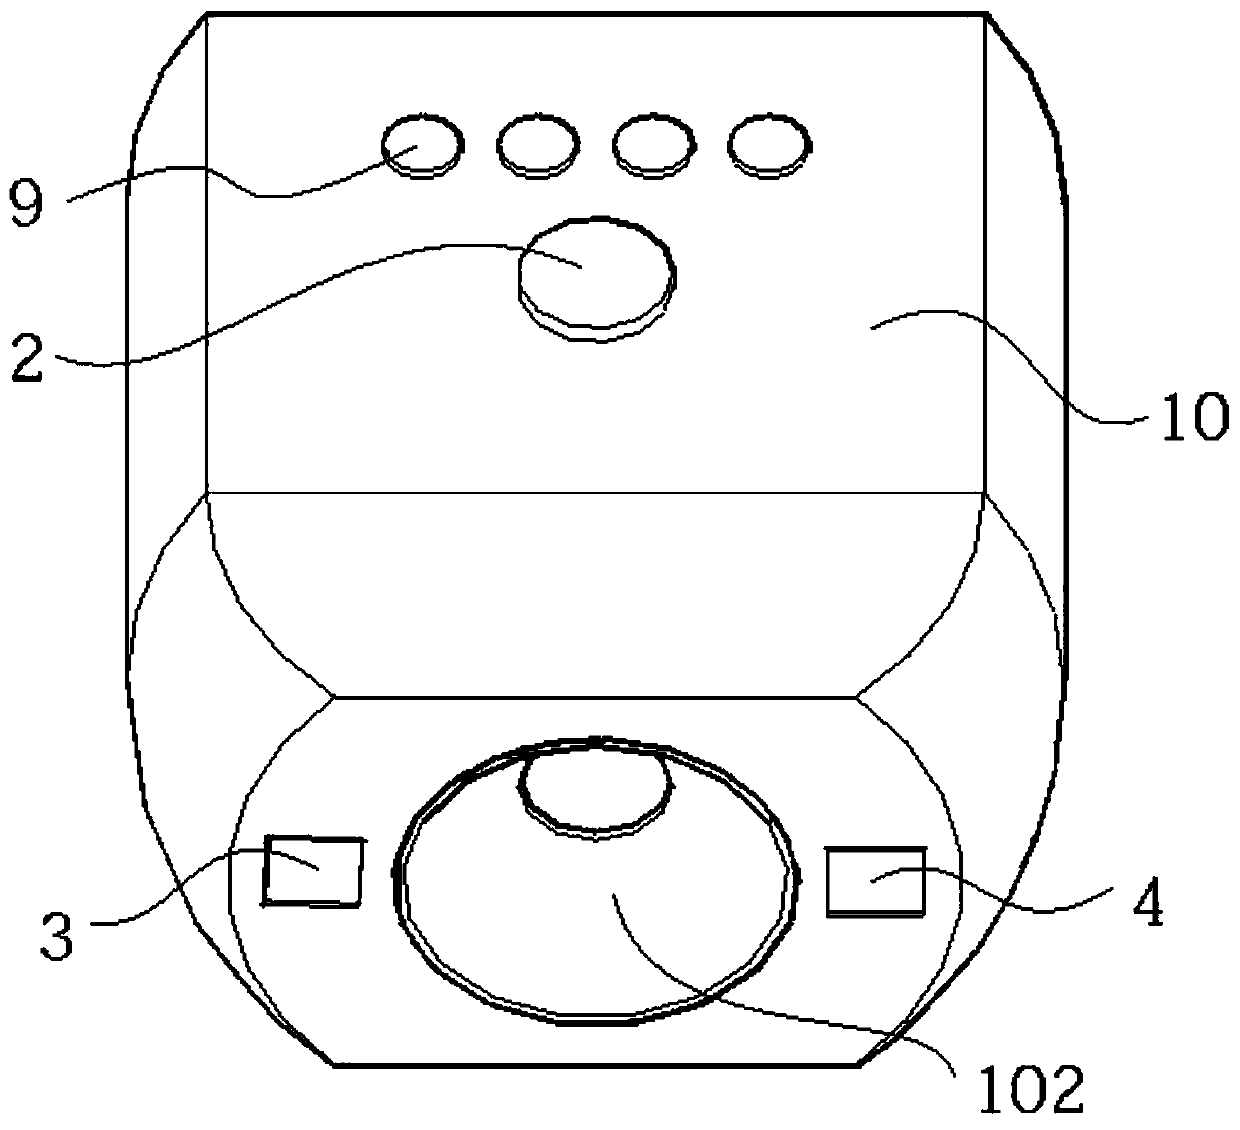 Laser hair removal device based on focused ultrasound, and control method thereof